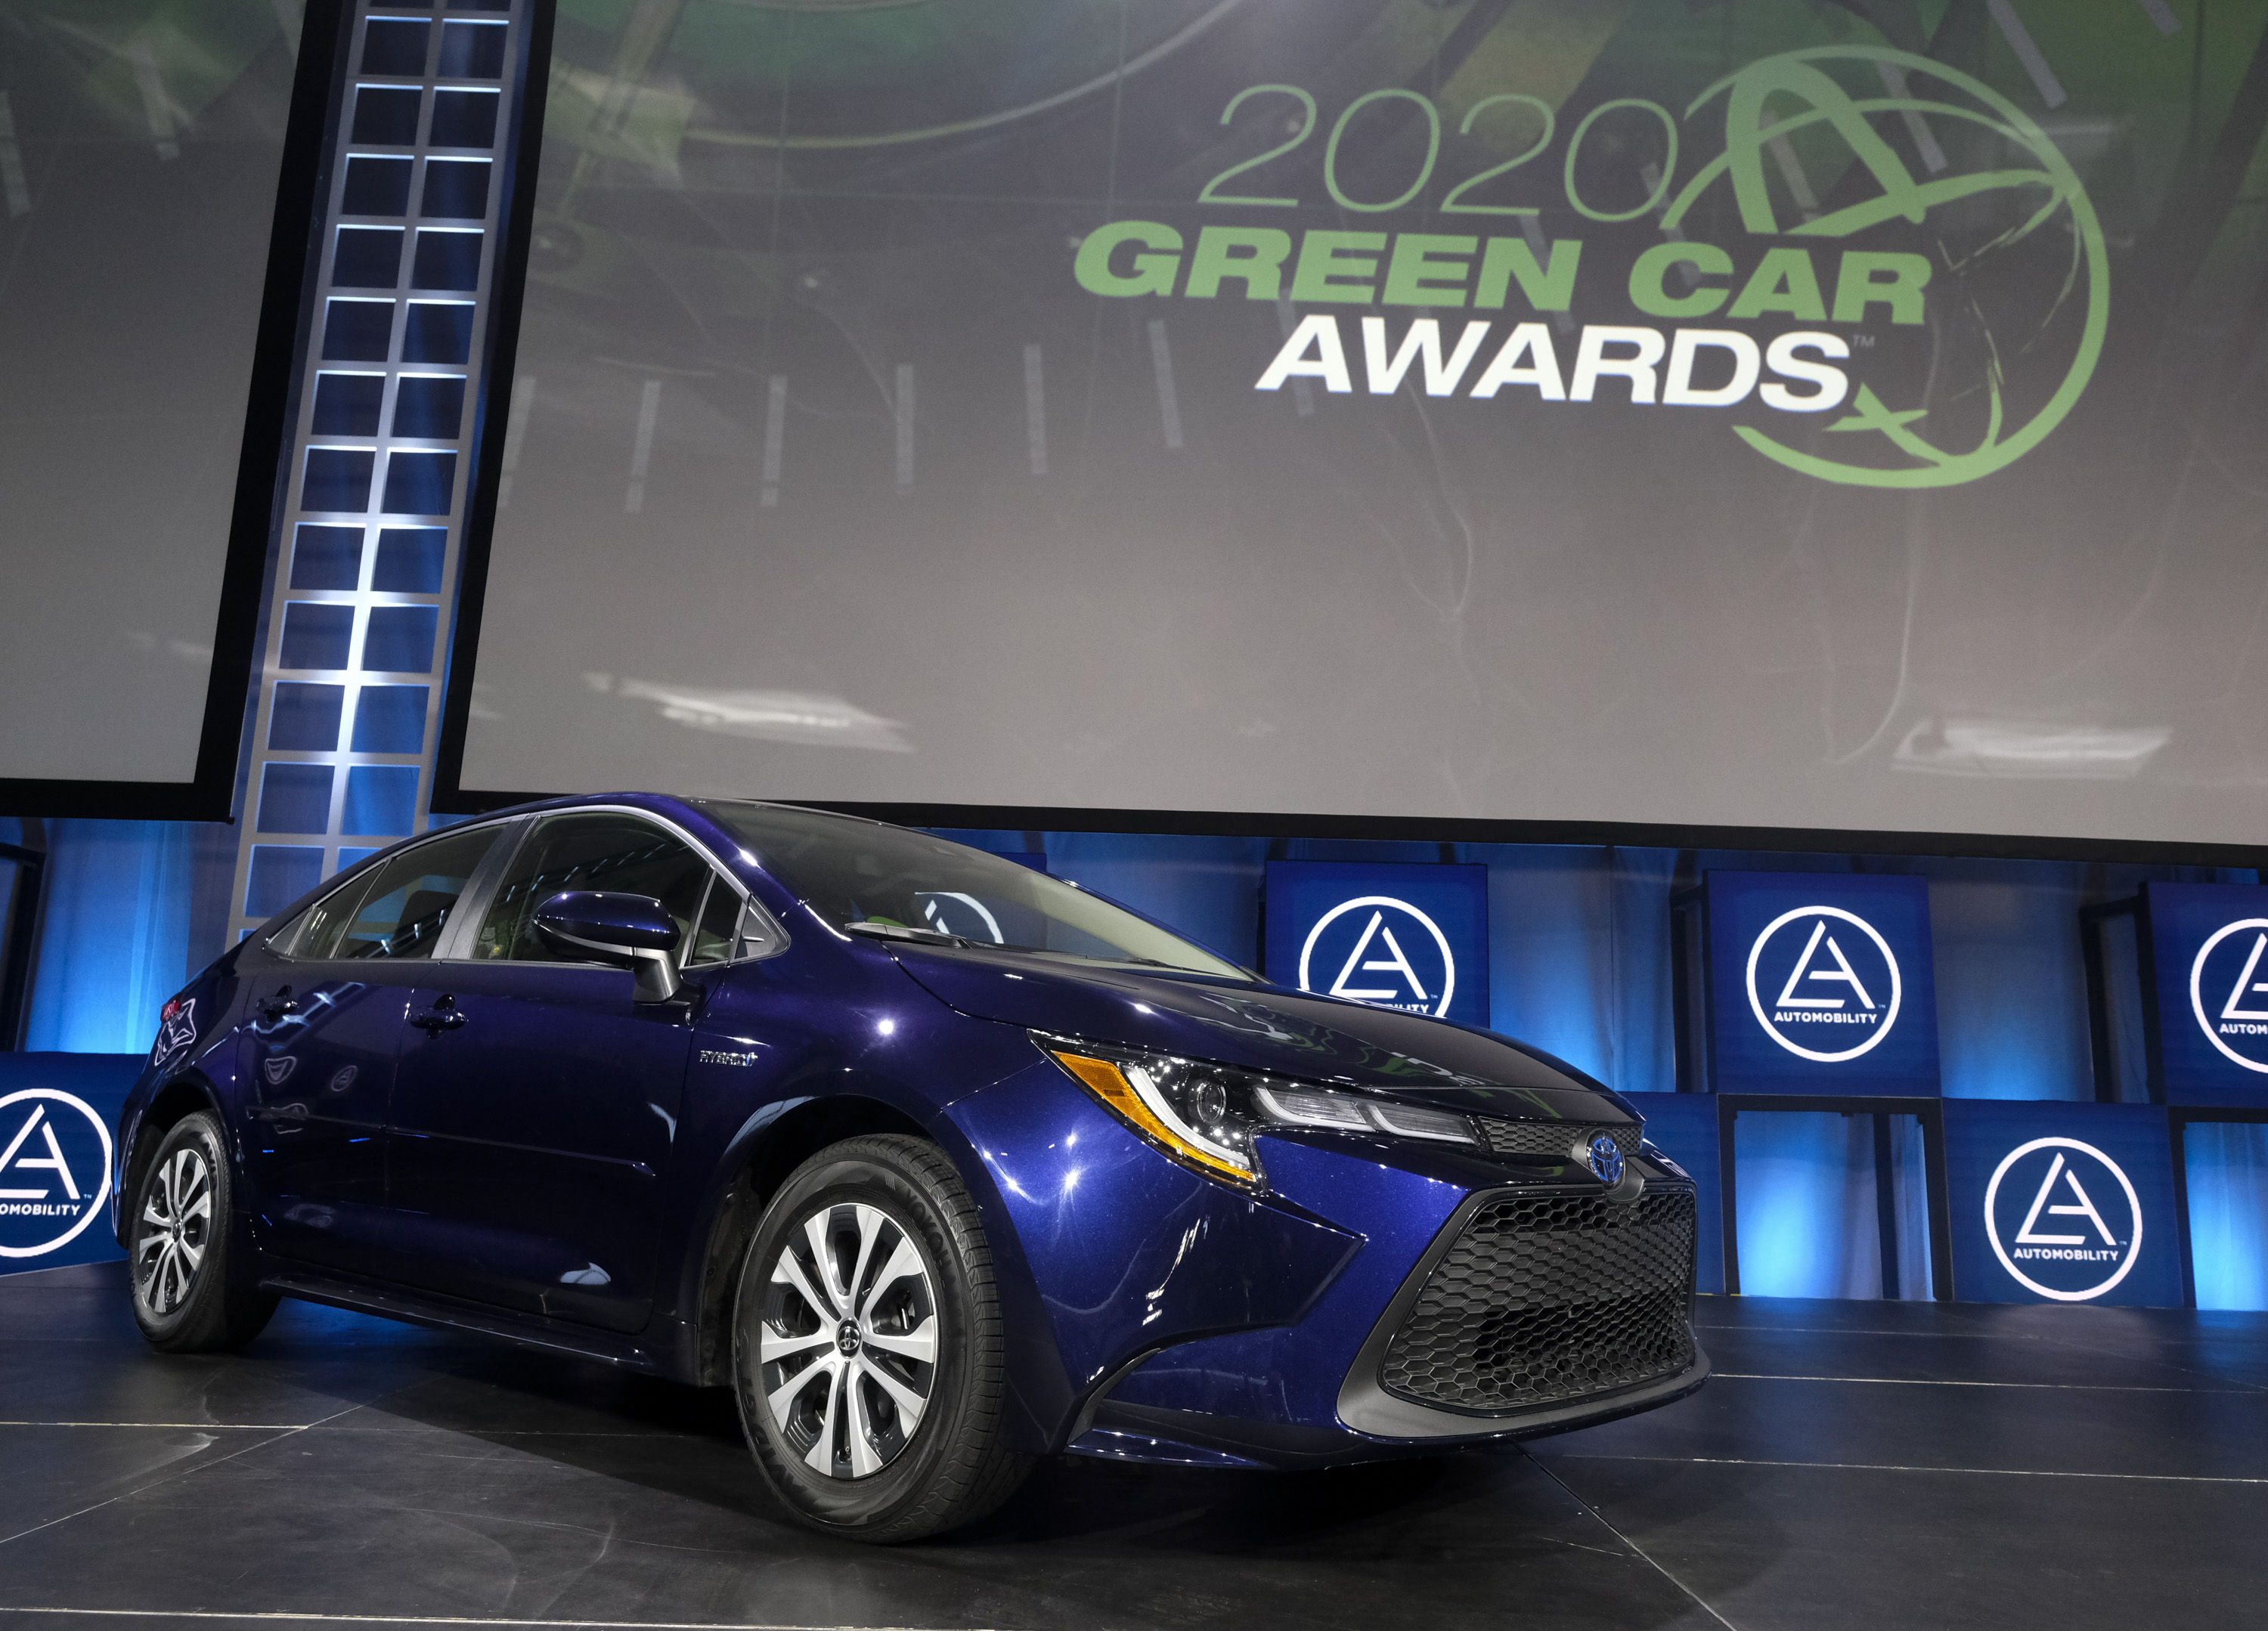 The Corolla Hybrid named 2020 Green Car of the Year Awards is unveiled during the Automobility LA auto show at the Convention Center in Los Angeles, California, USA, 21 November 2019. 